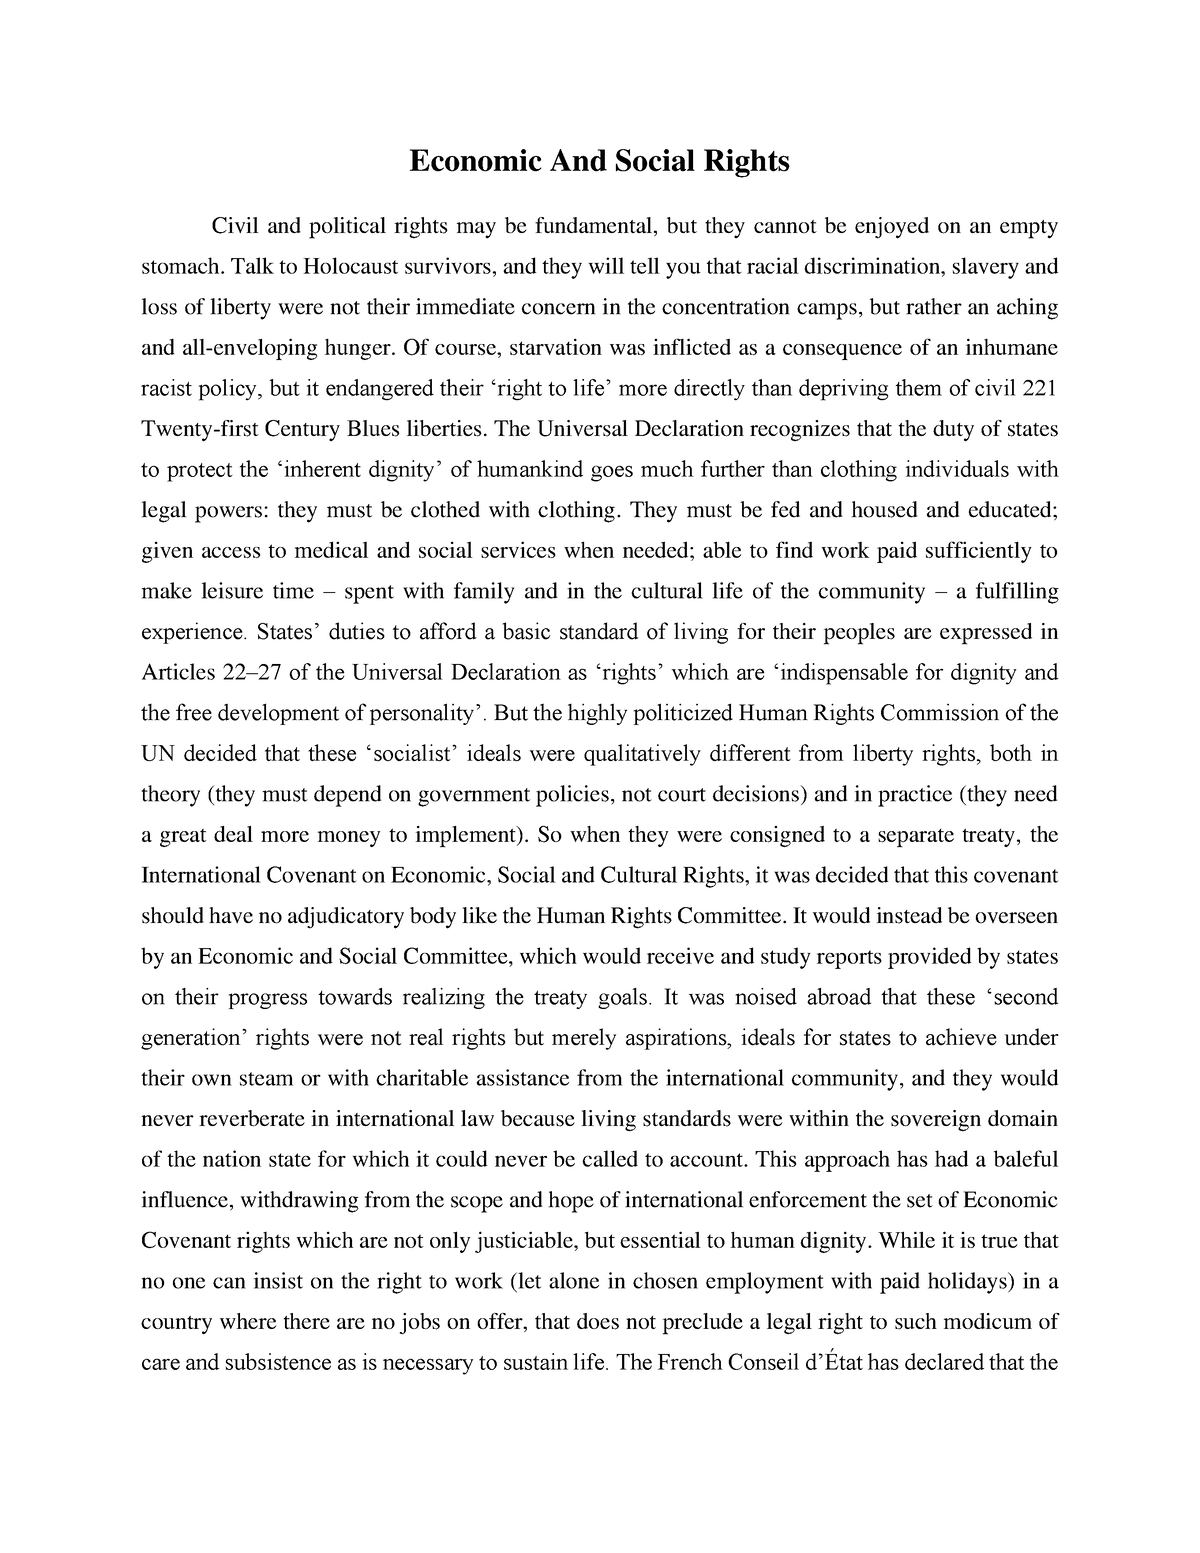 economic and social rights essay